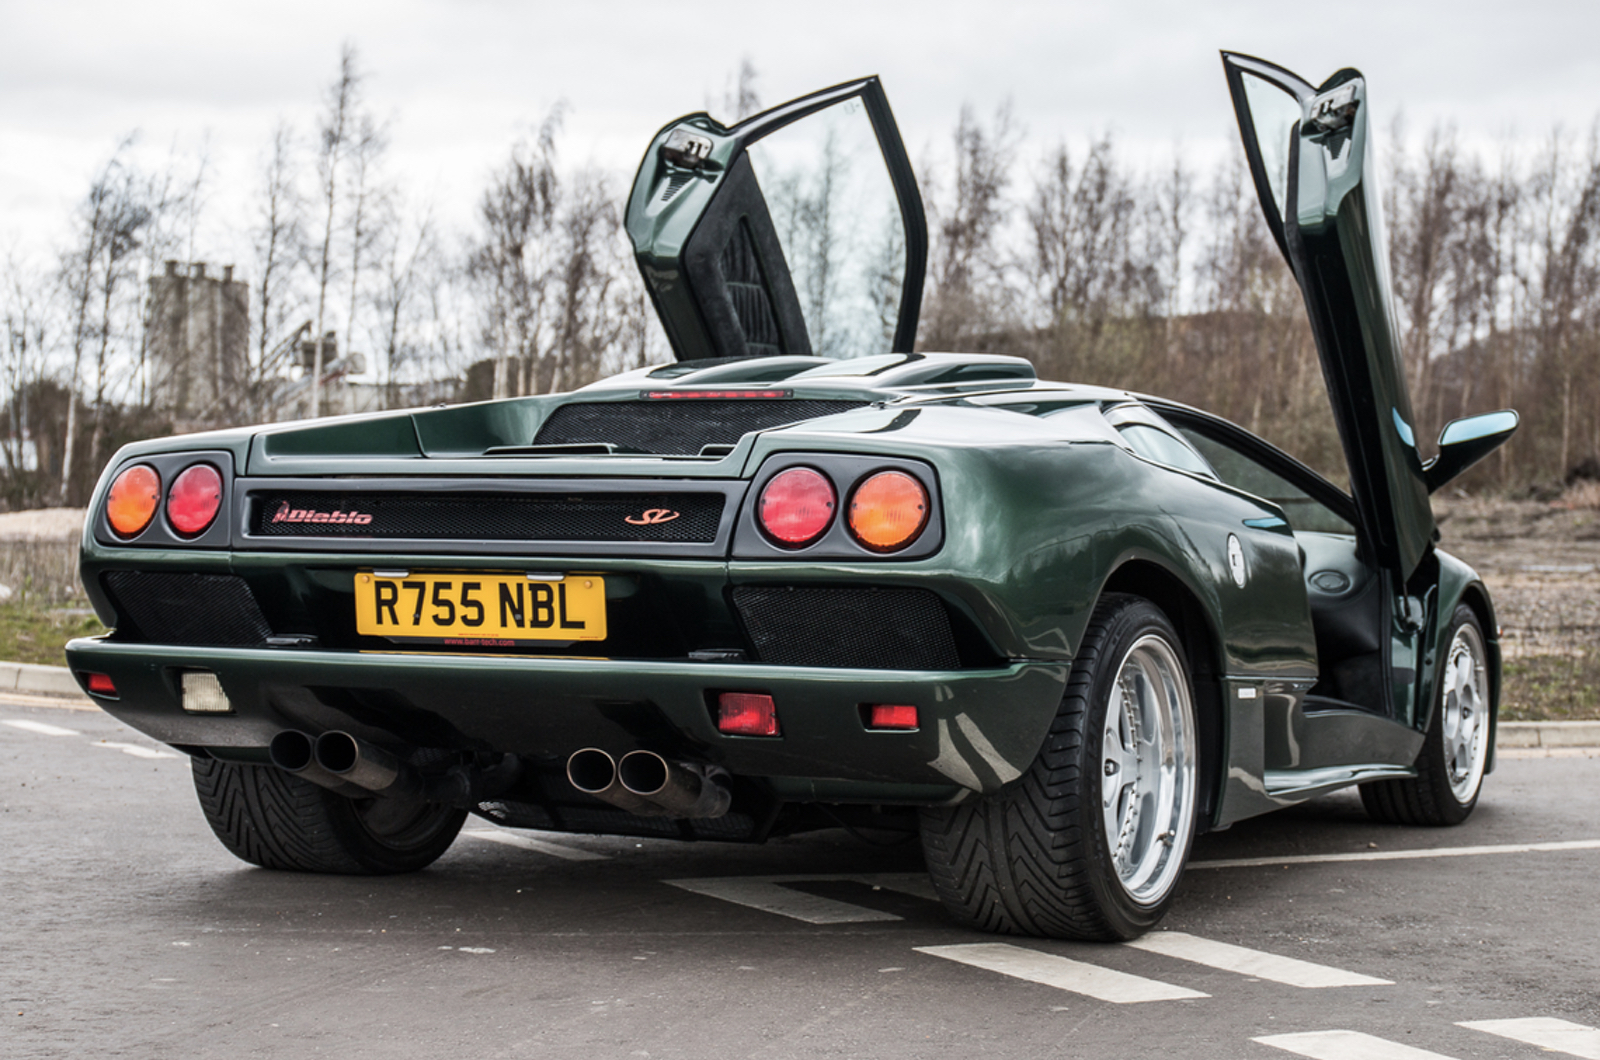 Lesser-spotted Lambo set for Silverstone auction